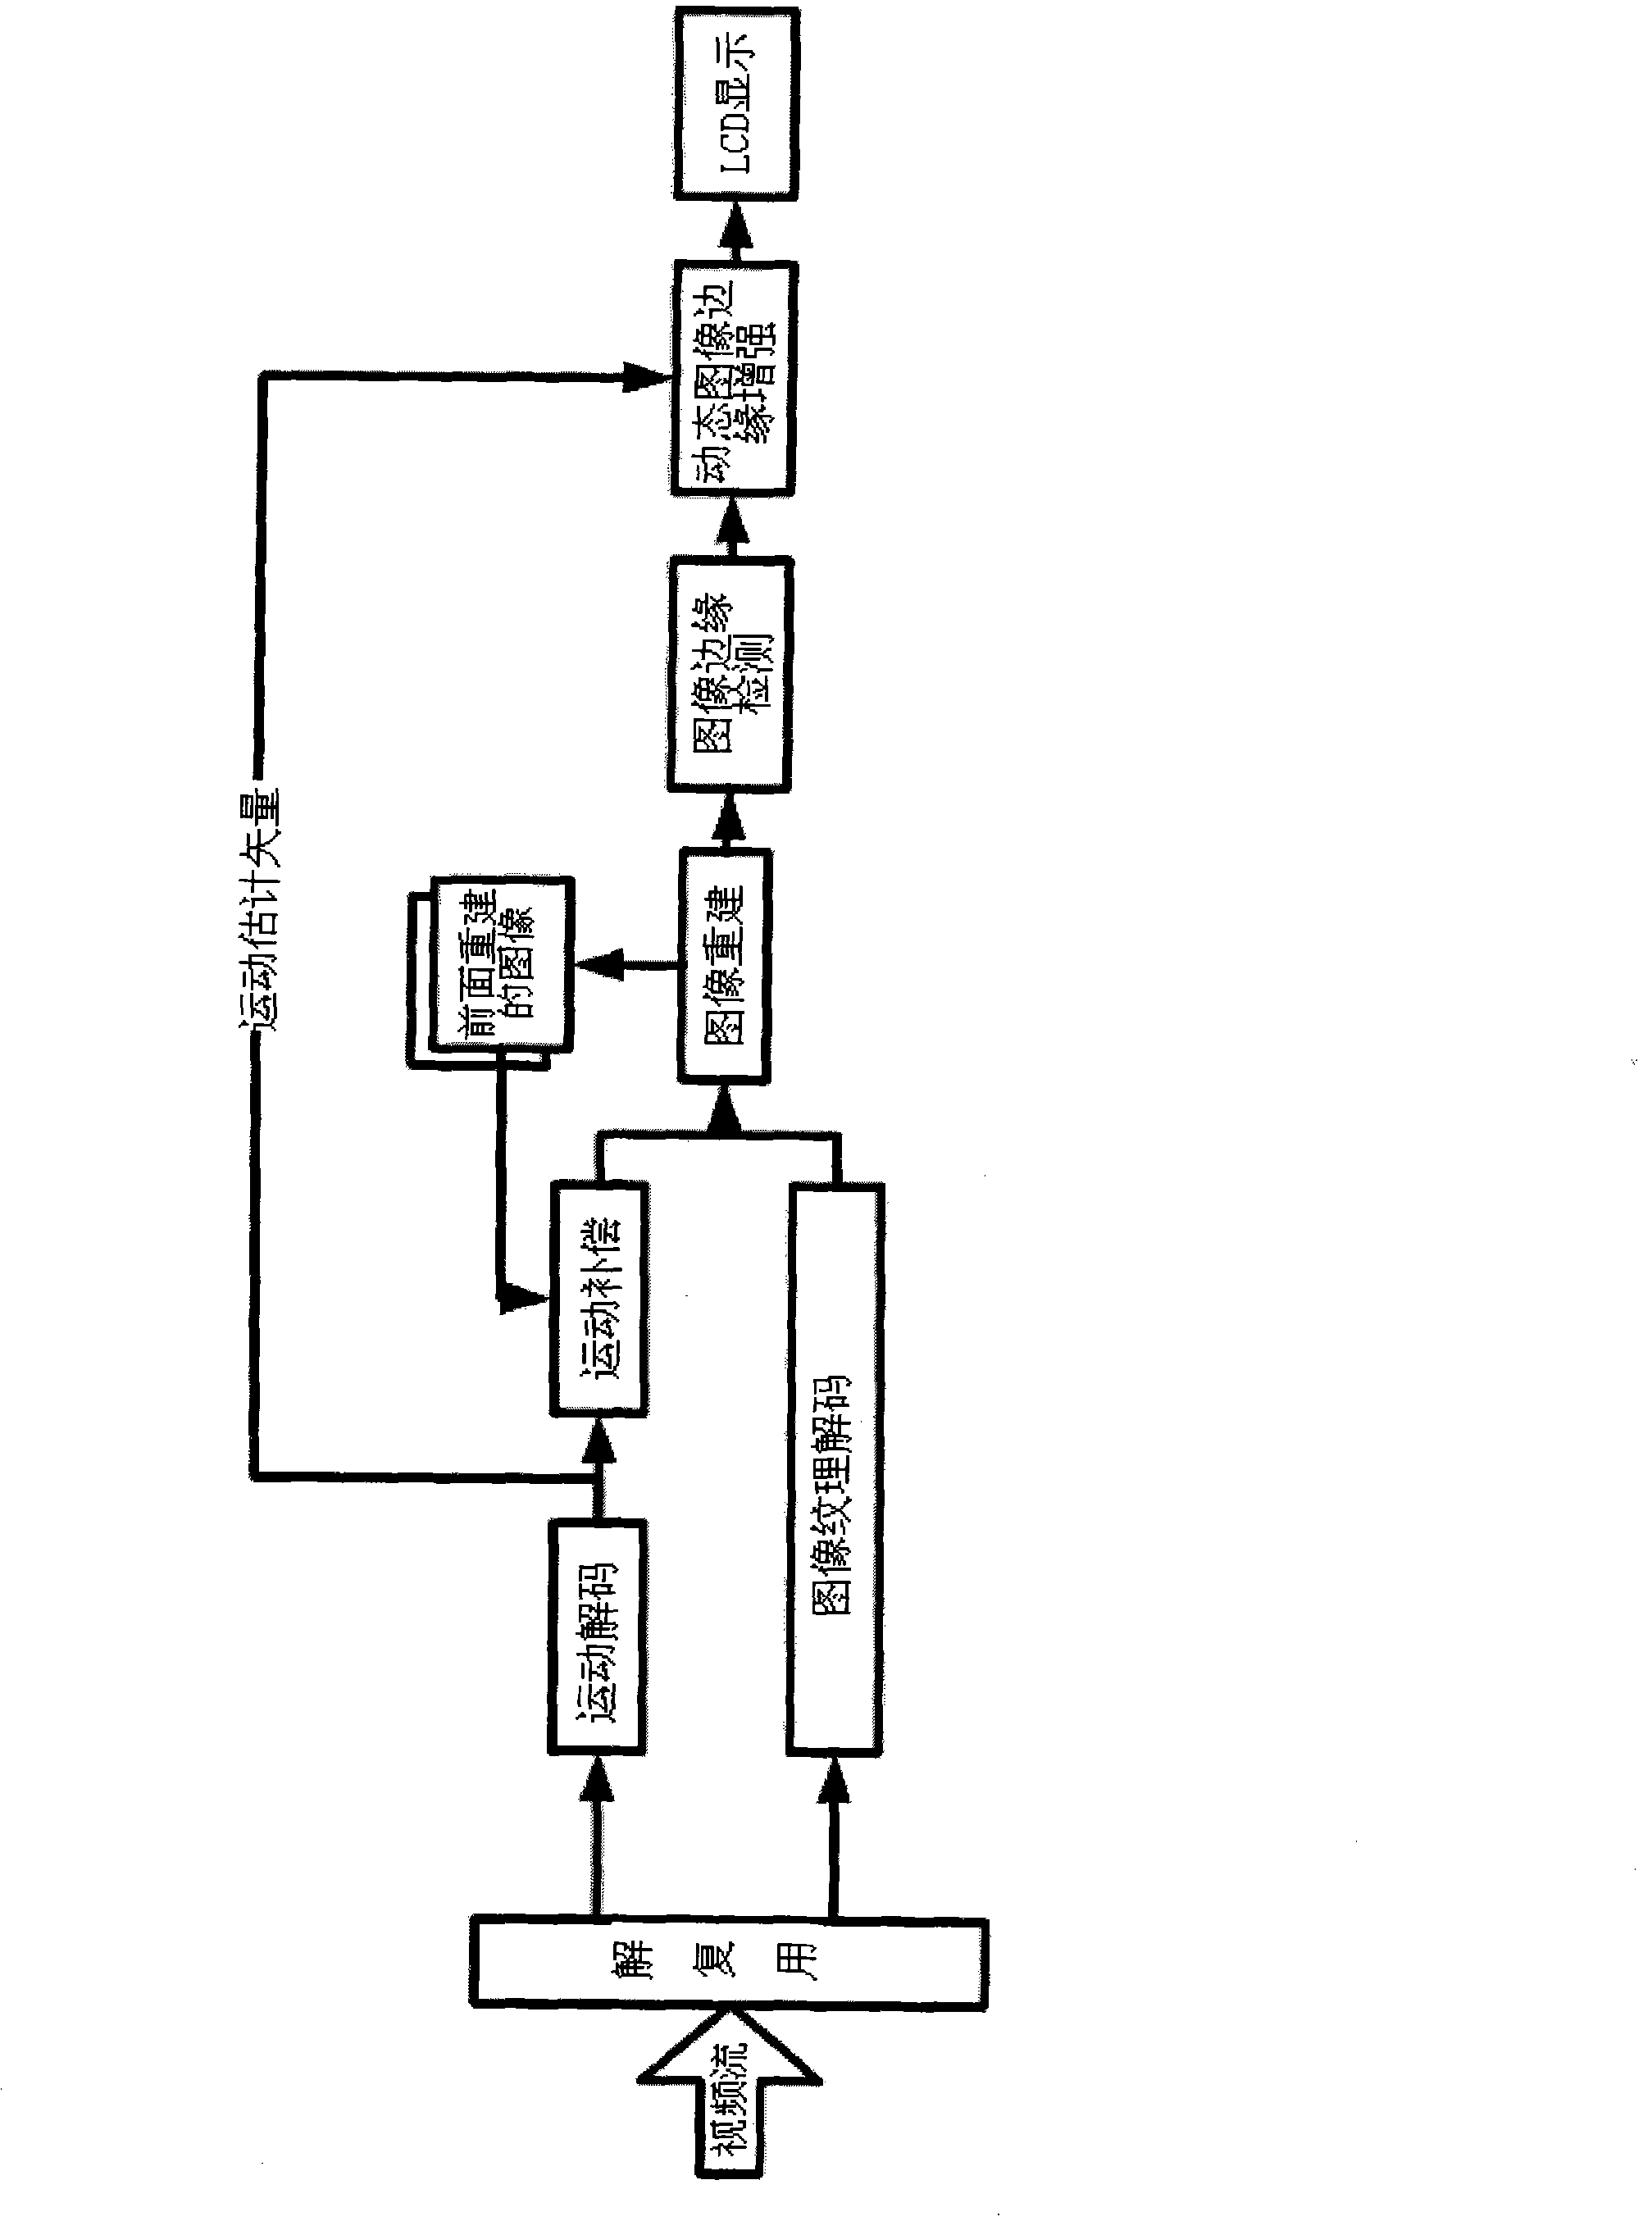 Video decoding method and device for reducing LCD display movement fuzz